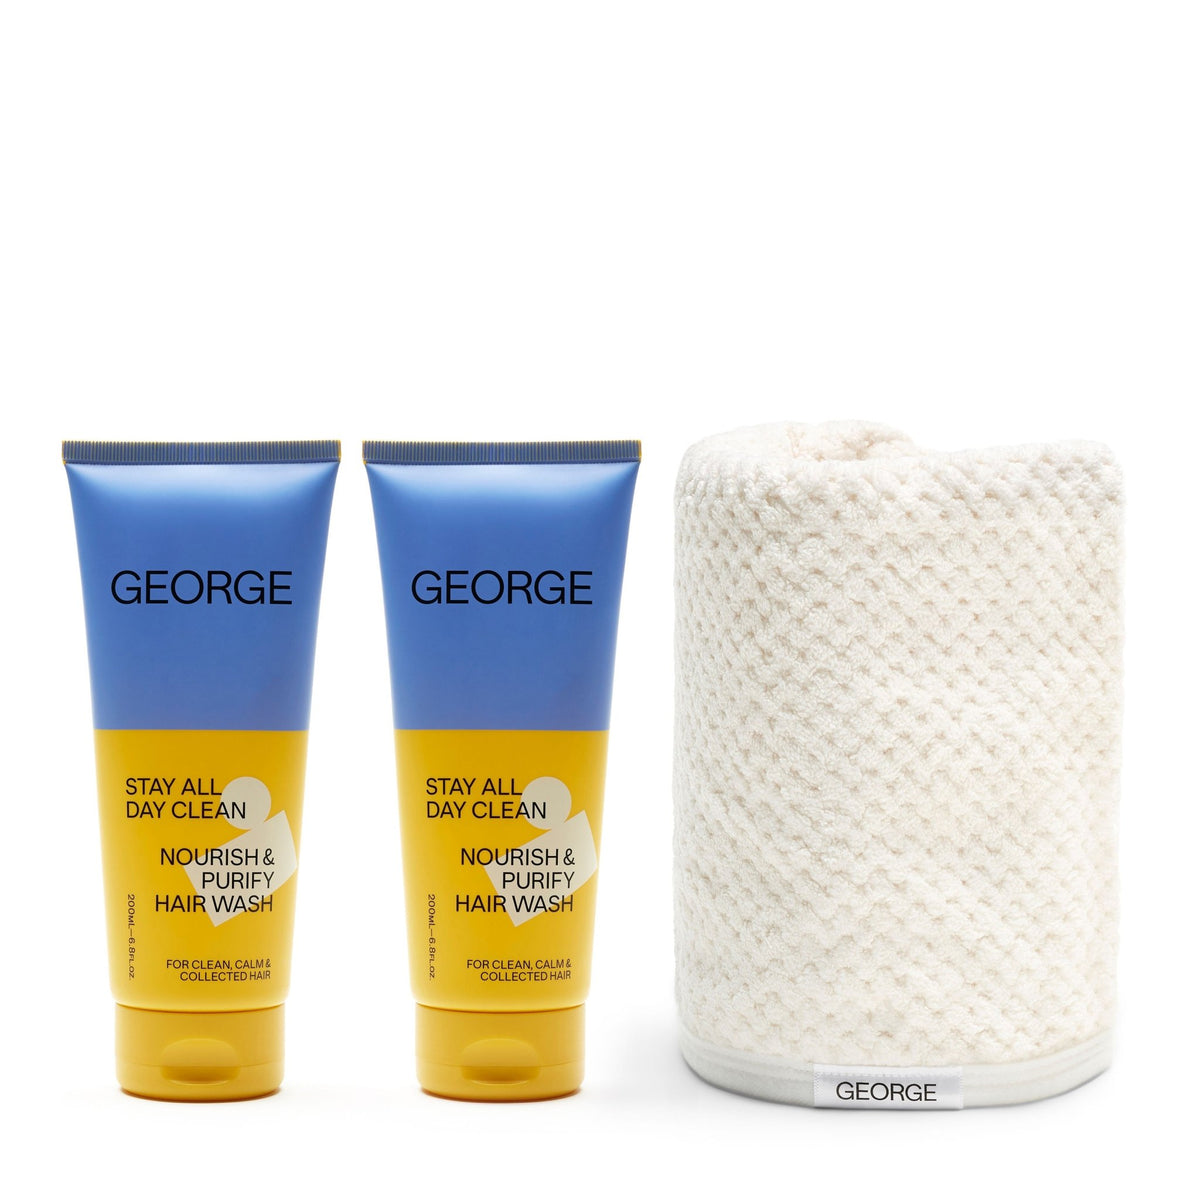 Stay All Day Clean Shampoo Kit - George Haircare